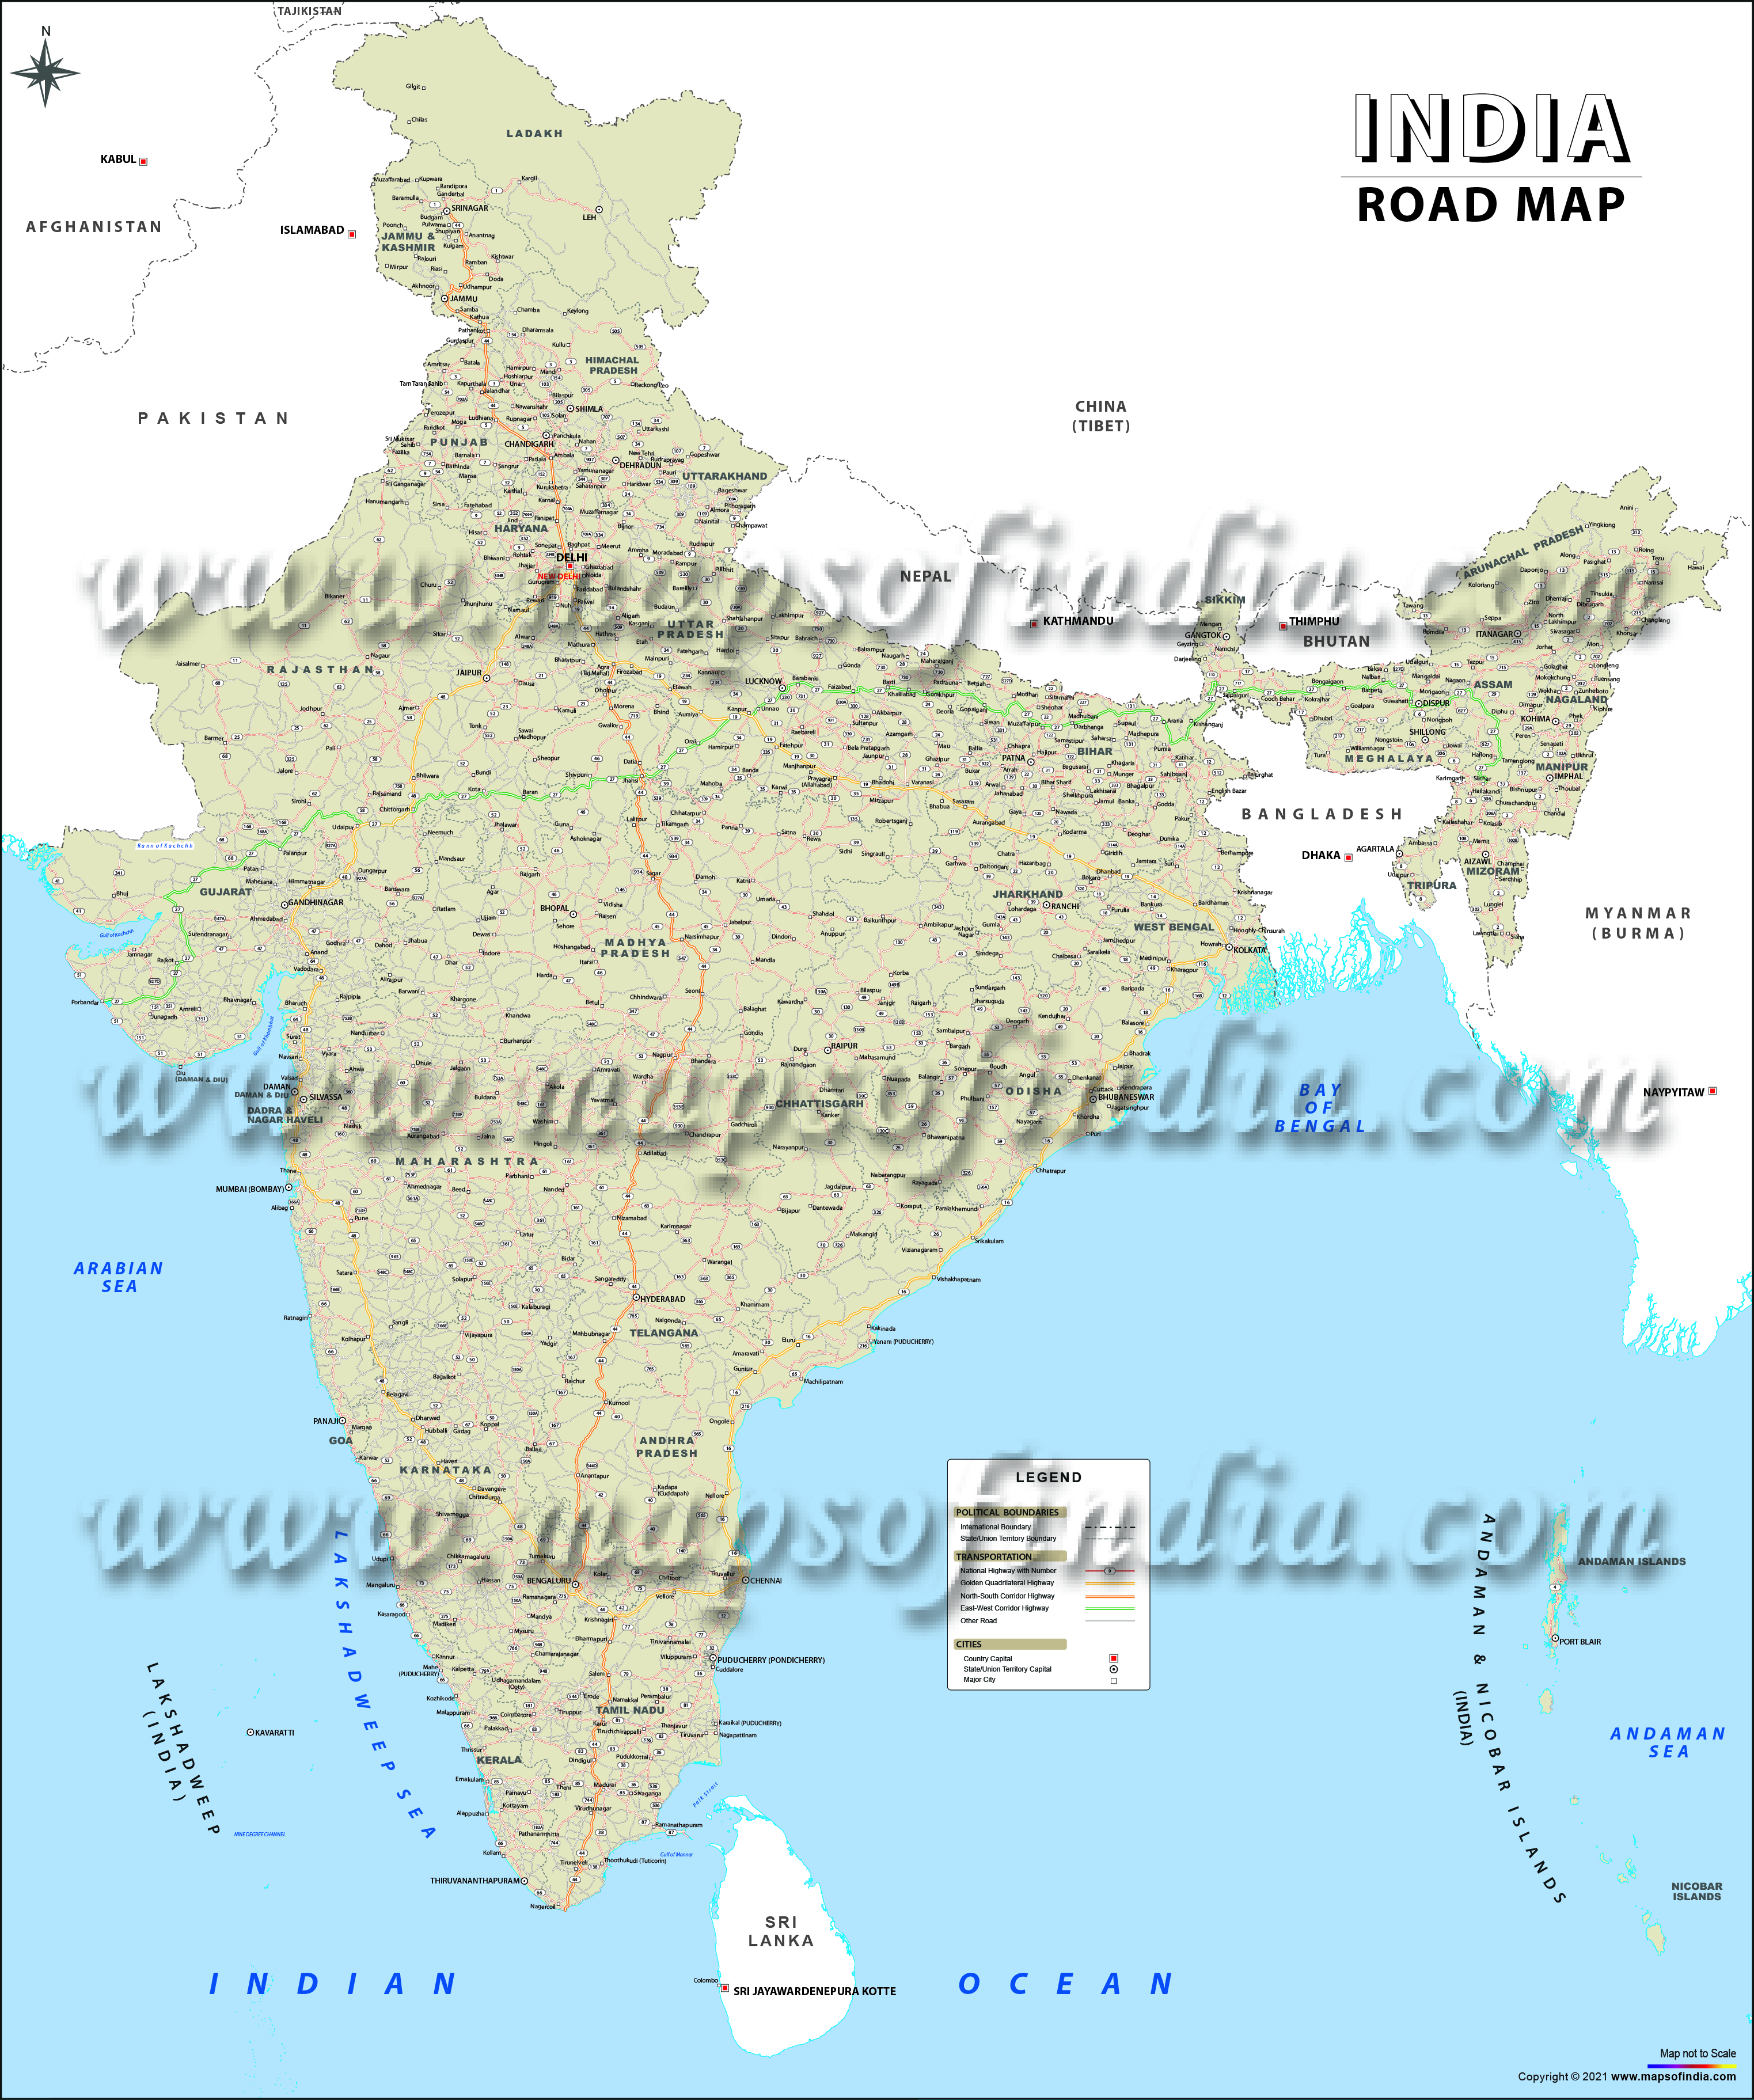 Road Maps Of India With Distance Calculator India Road Maps, Indian Road Network, List of Expressways India